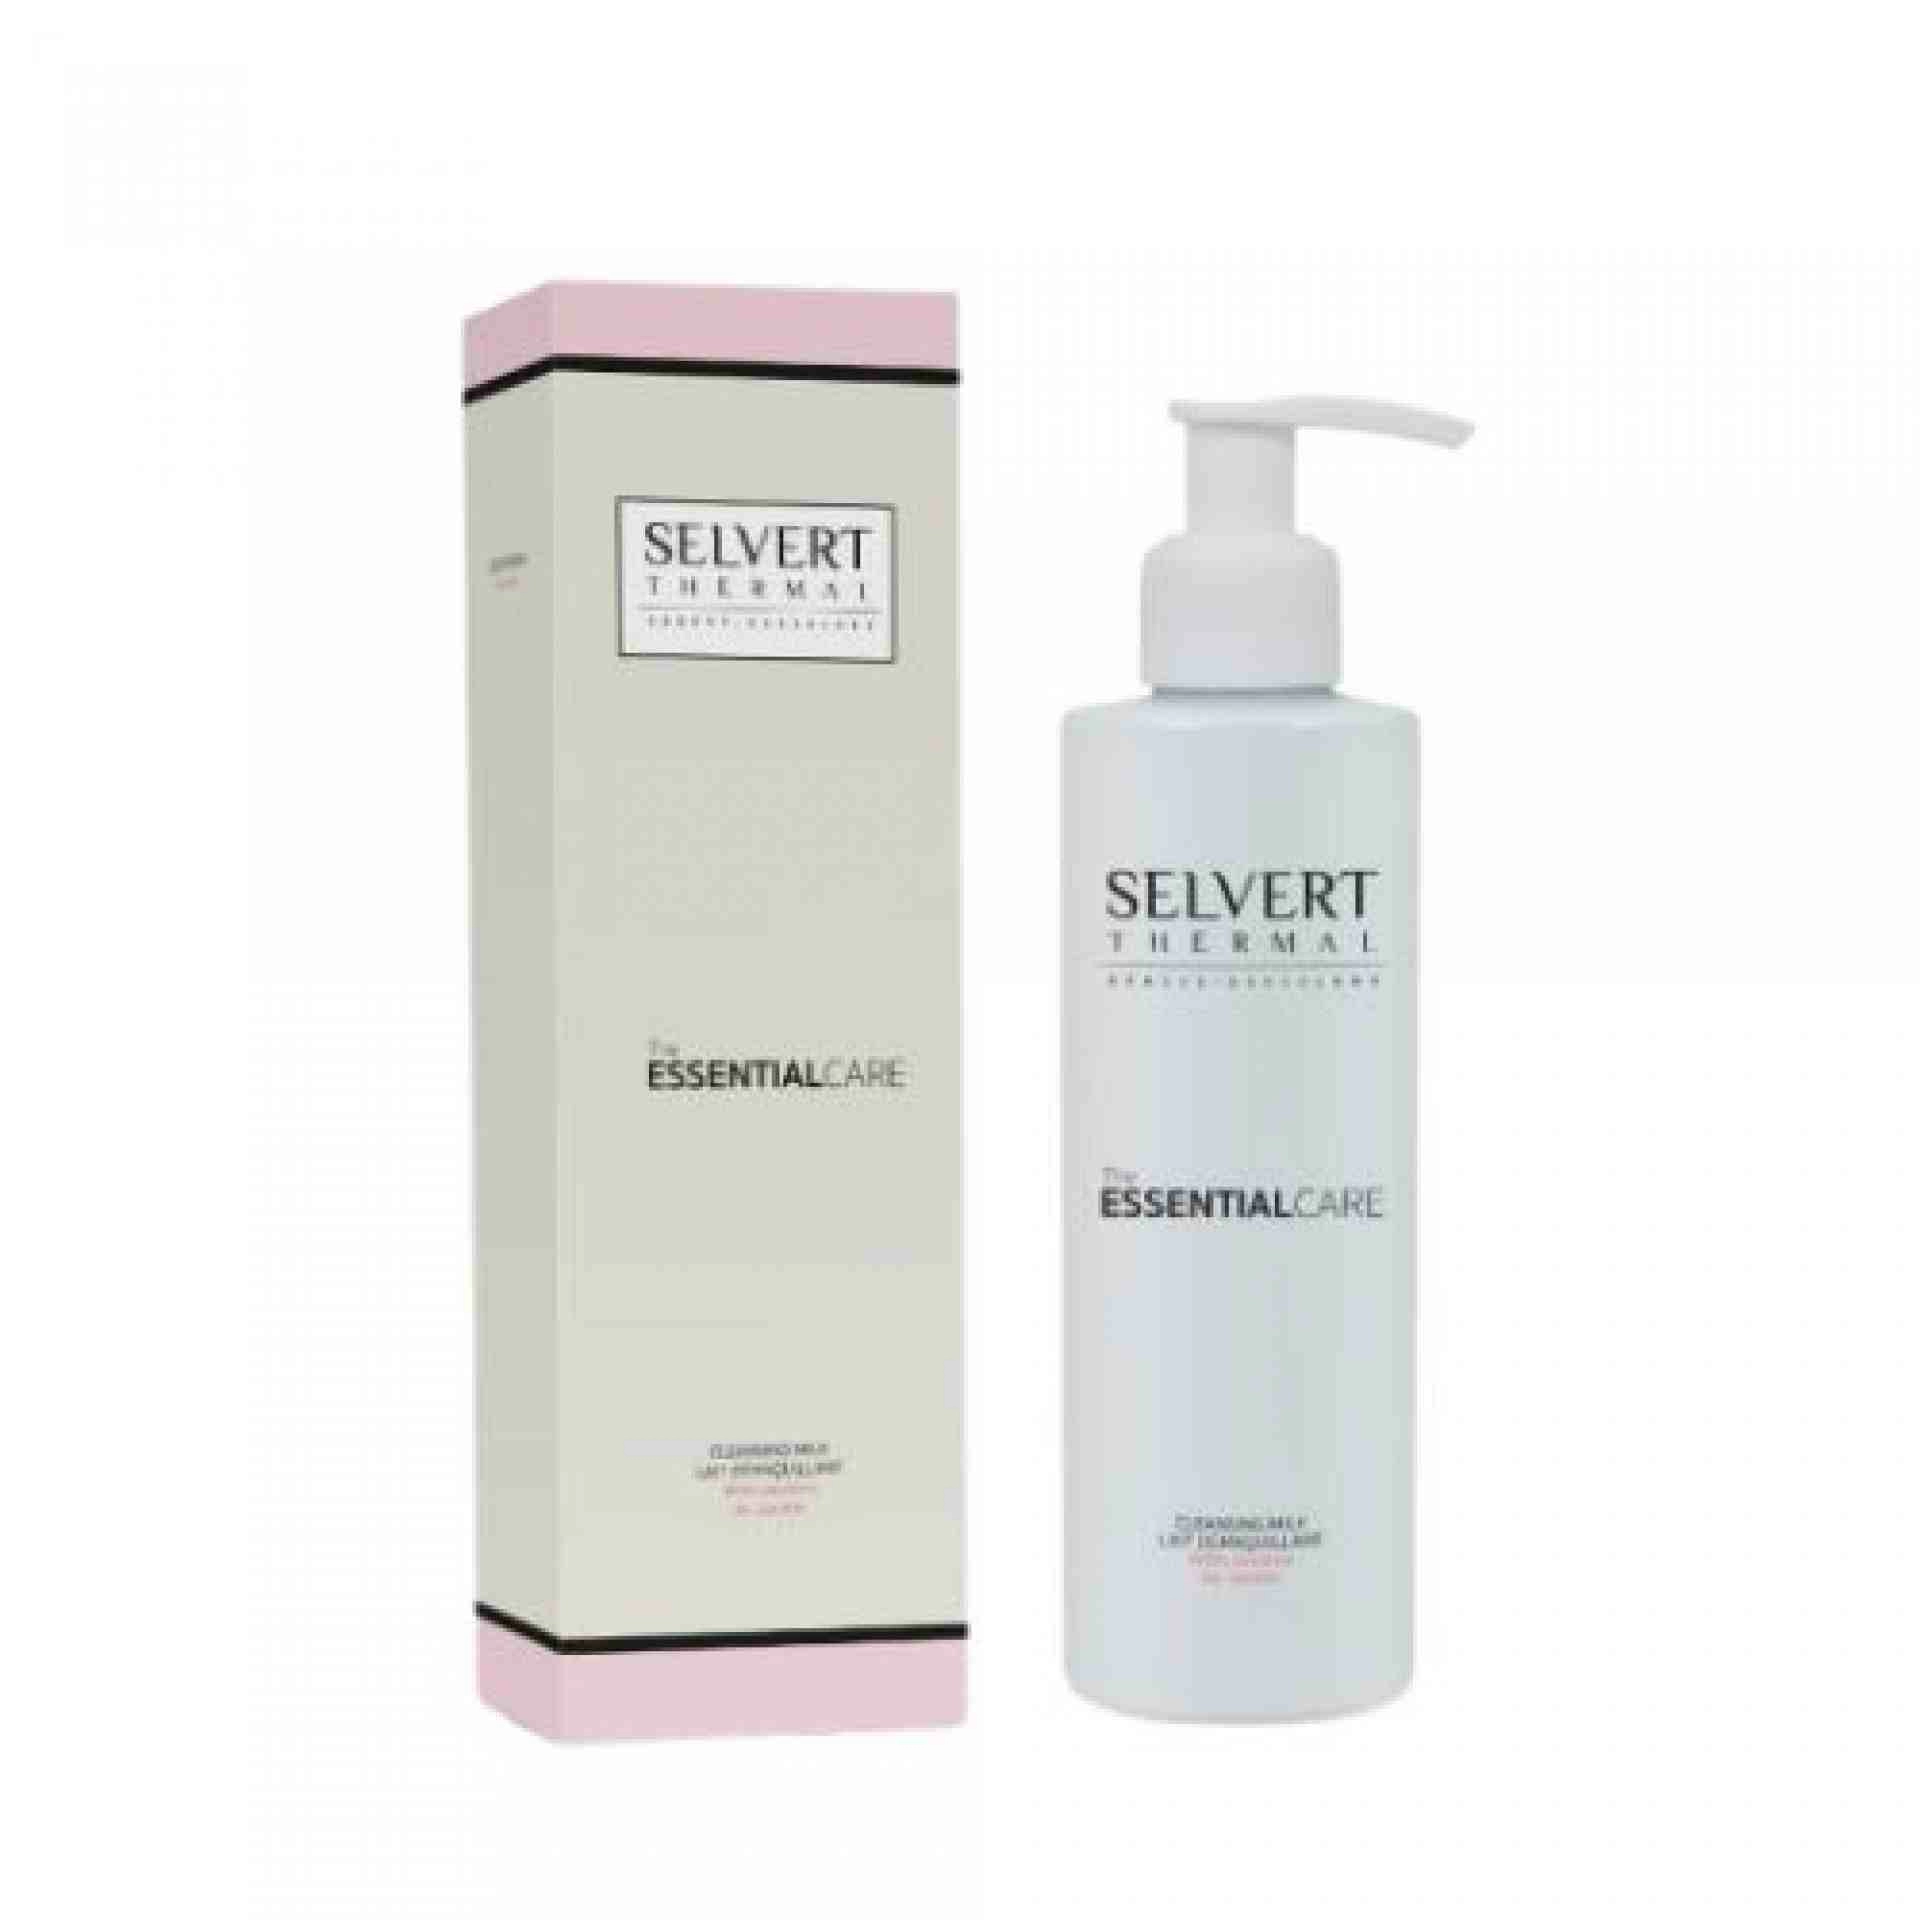 Cleansing milk with jasmine | Leche limpiadora 200ml - The Essential Care - Selvert Thermal  ®